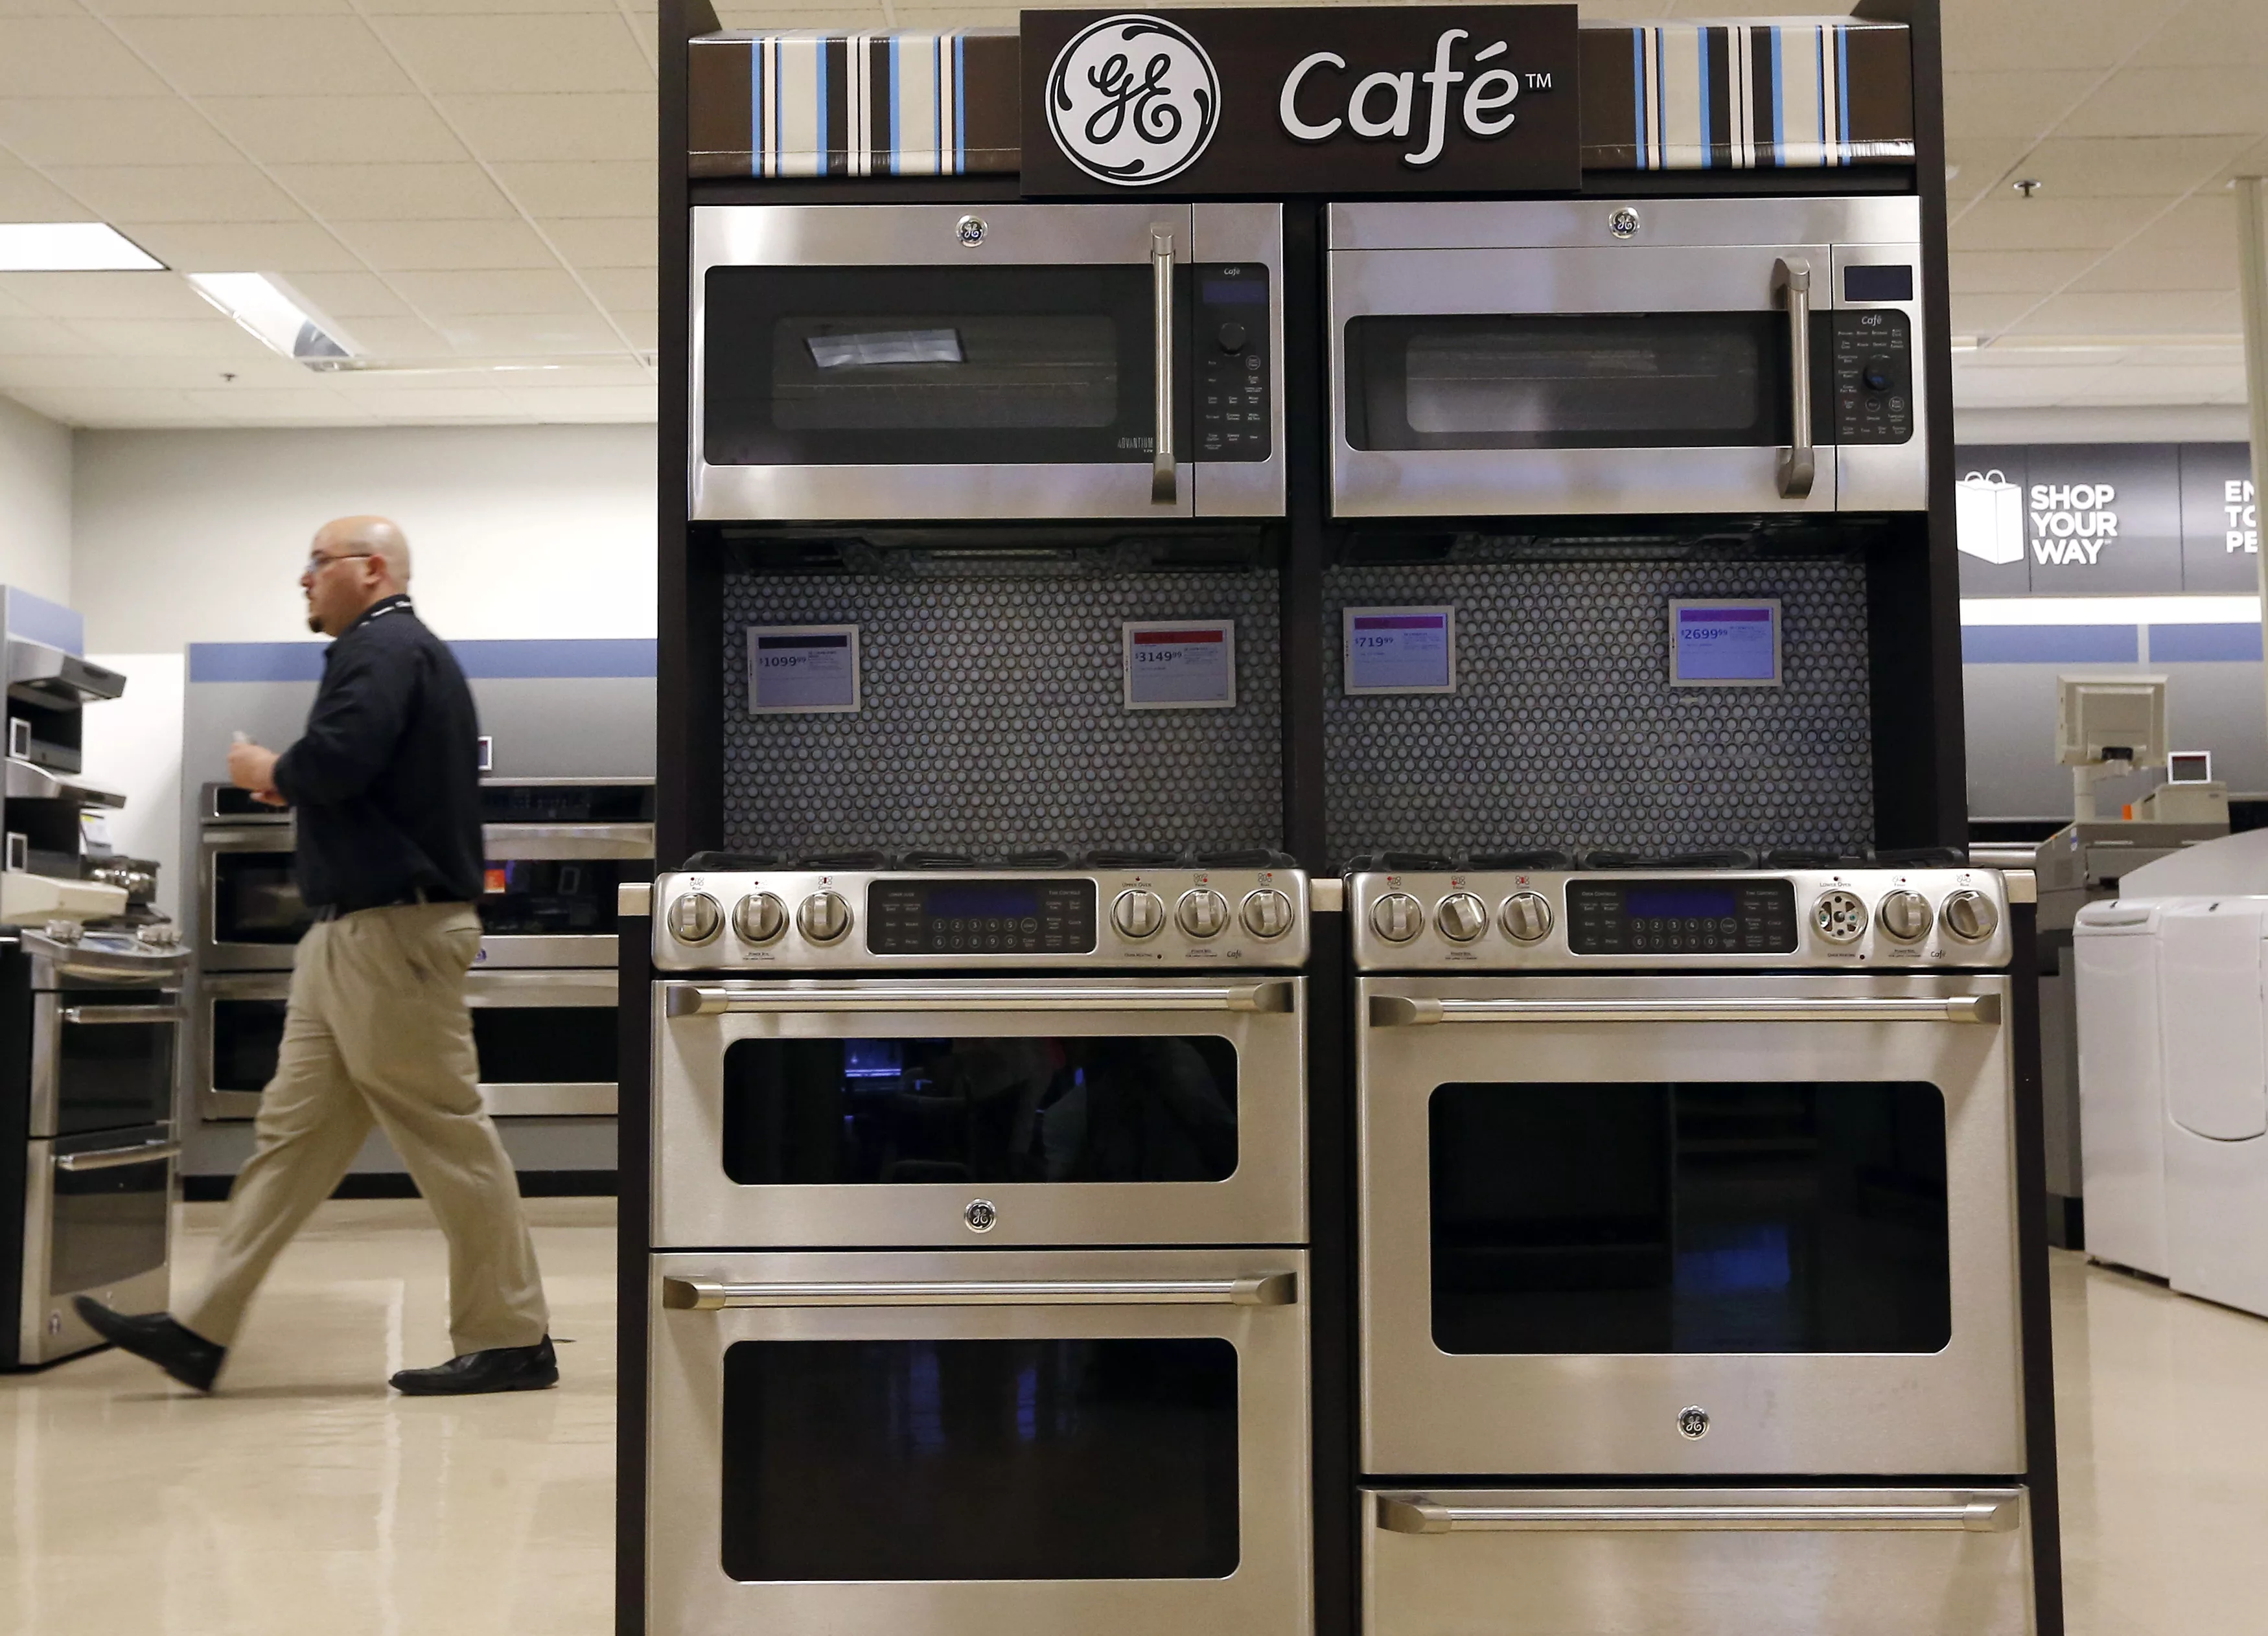 sears-employee-walks-past-a-display-of-general-electric-appliances-in-schaumburg